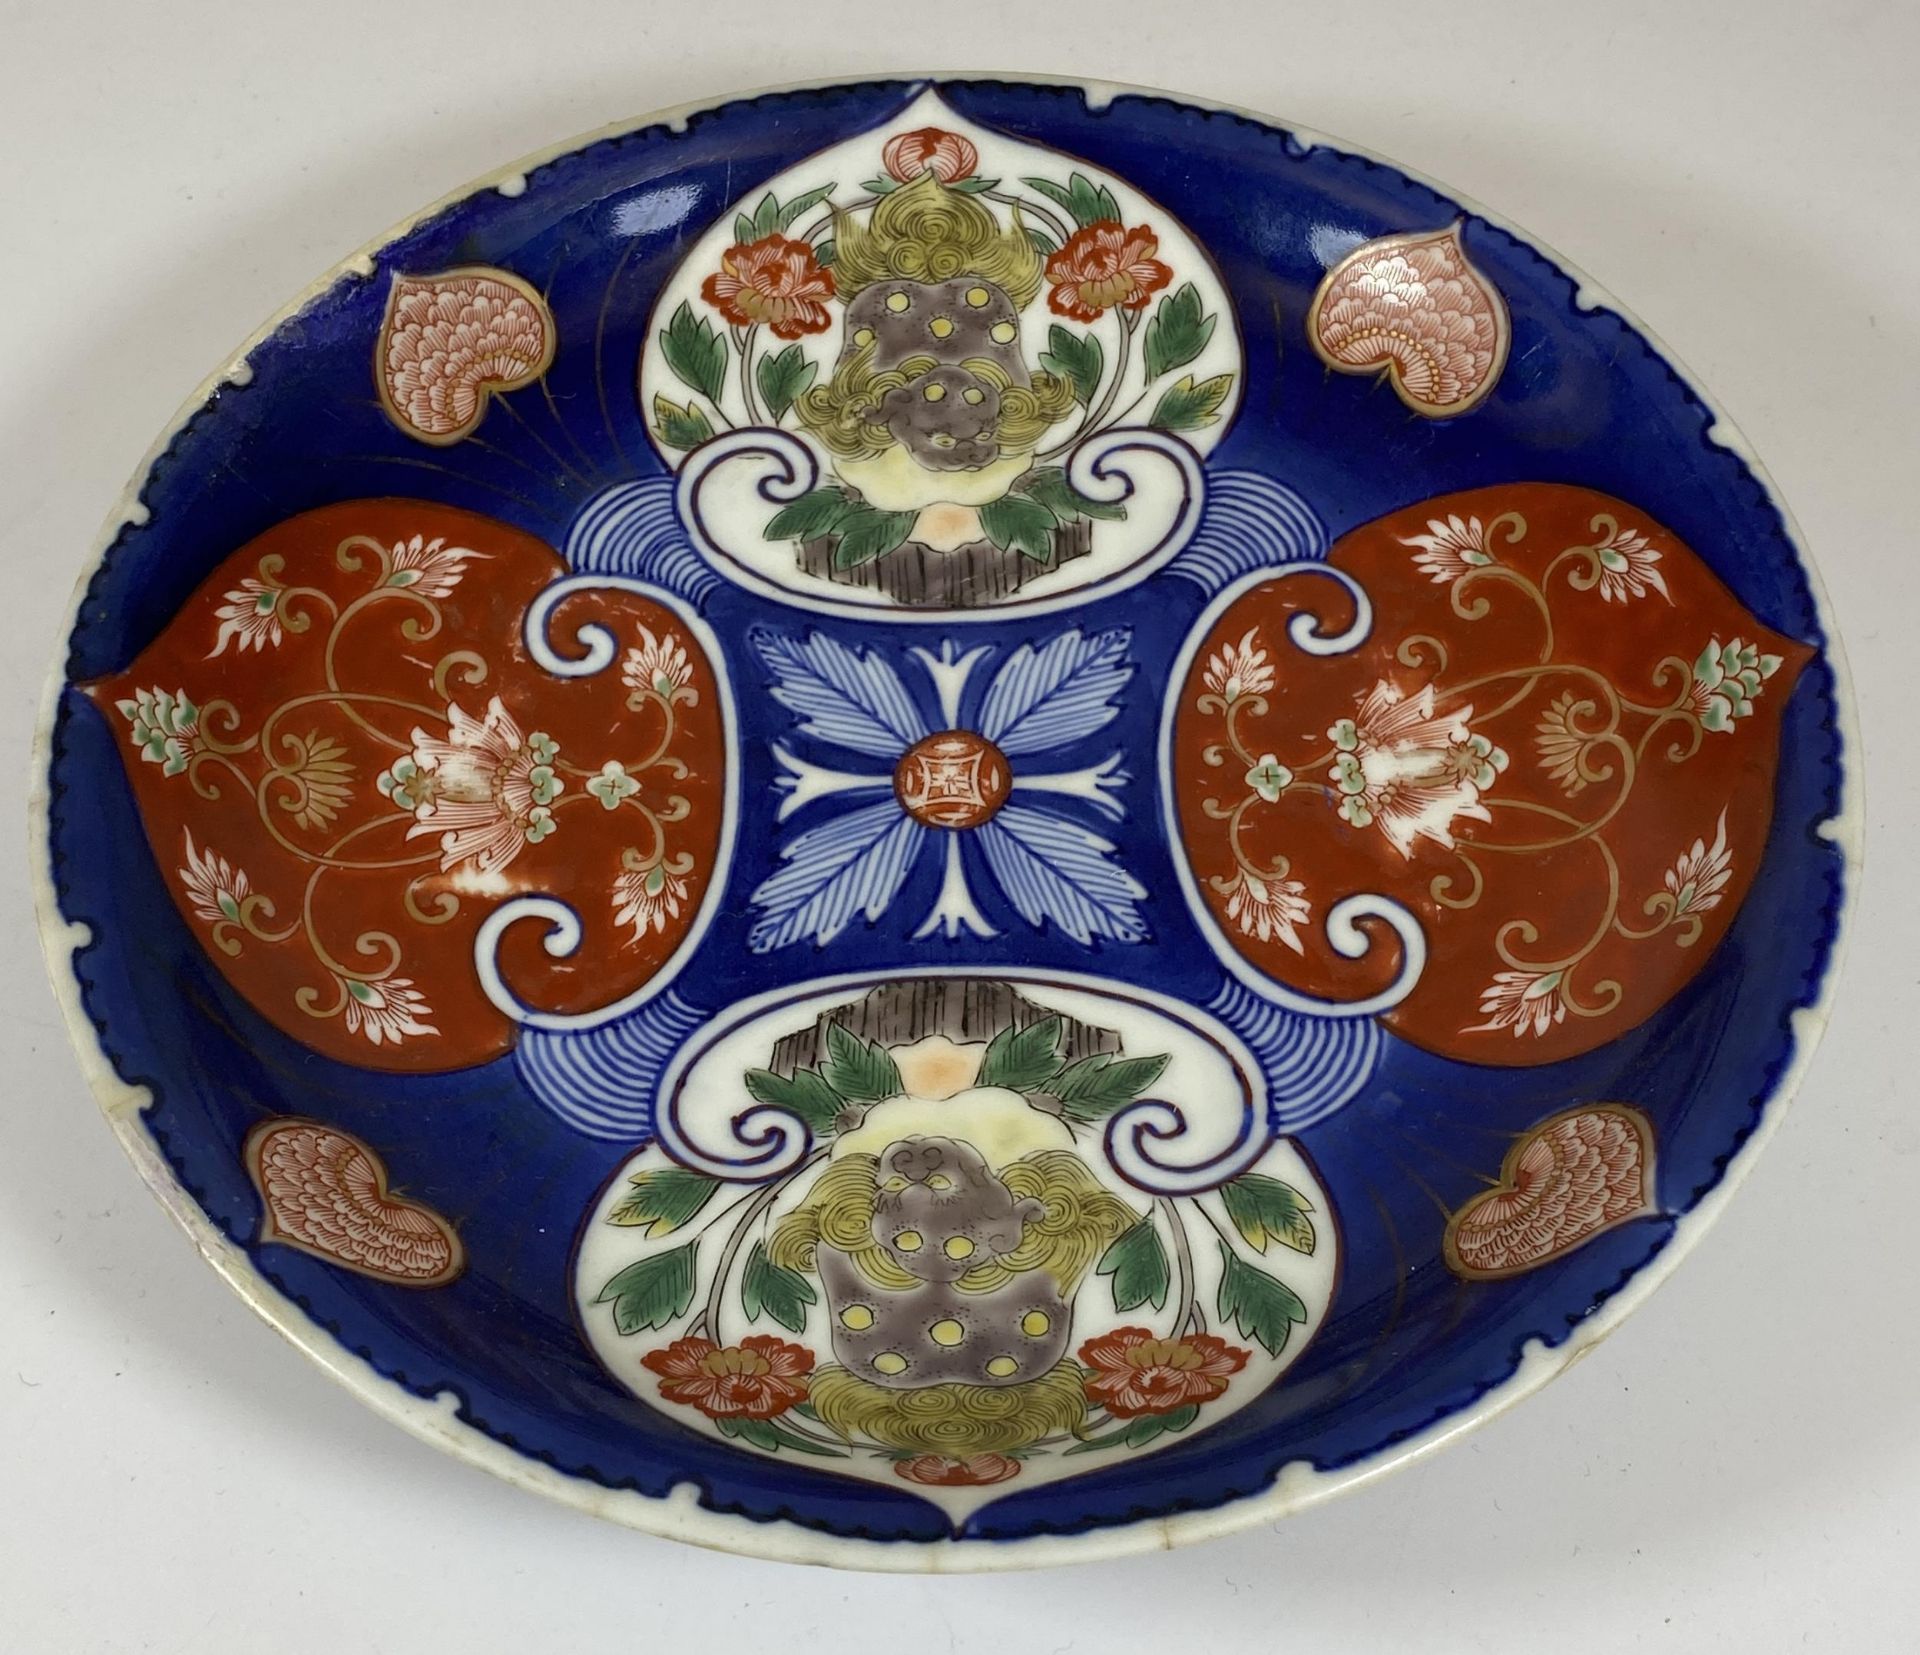 A JAPANESE MEIJI PERIOD (1868-1912) IMARI ON BLUE GROUND FLORAL PATTERN DISH, SIX CHARACTER MARK